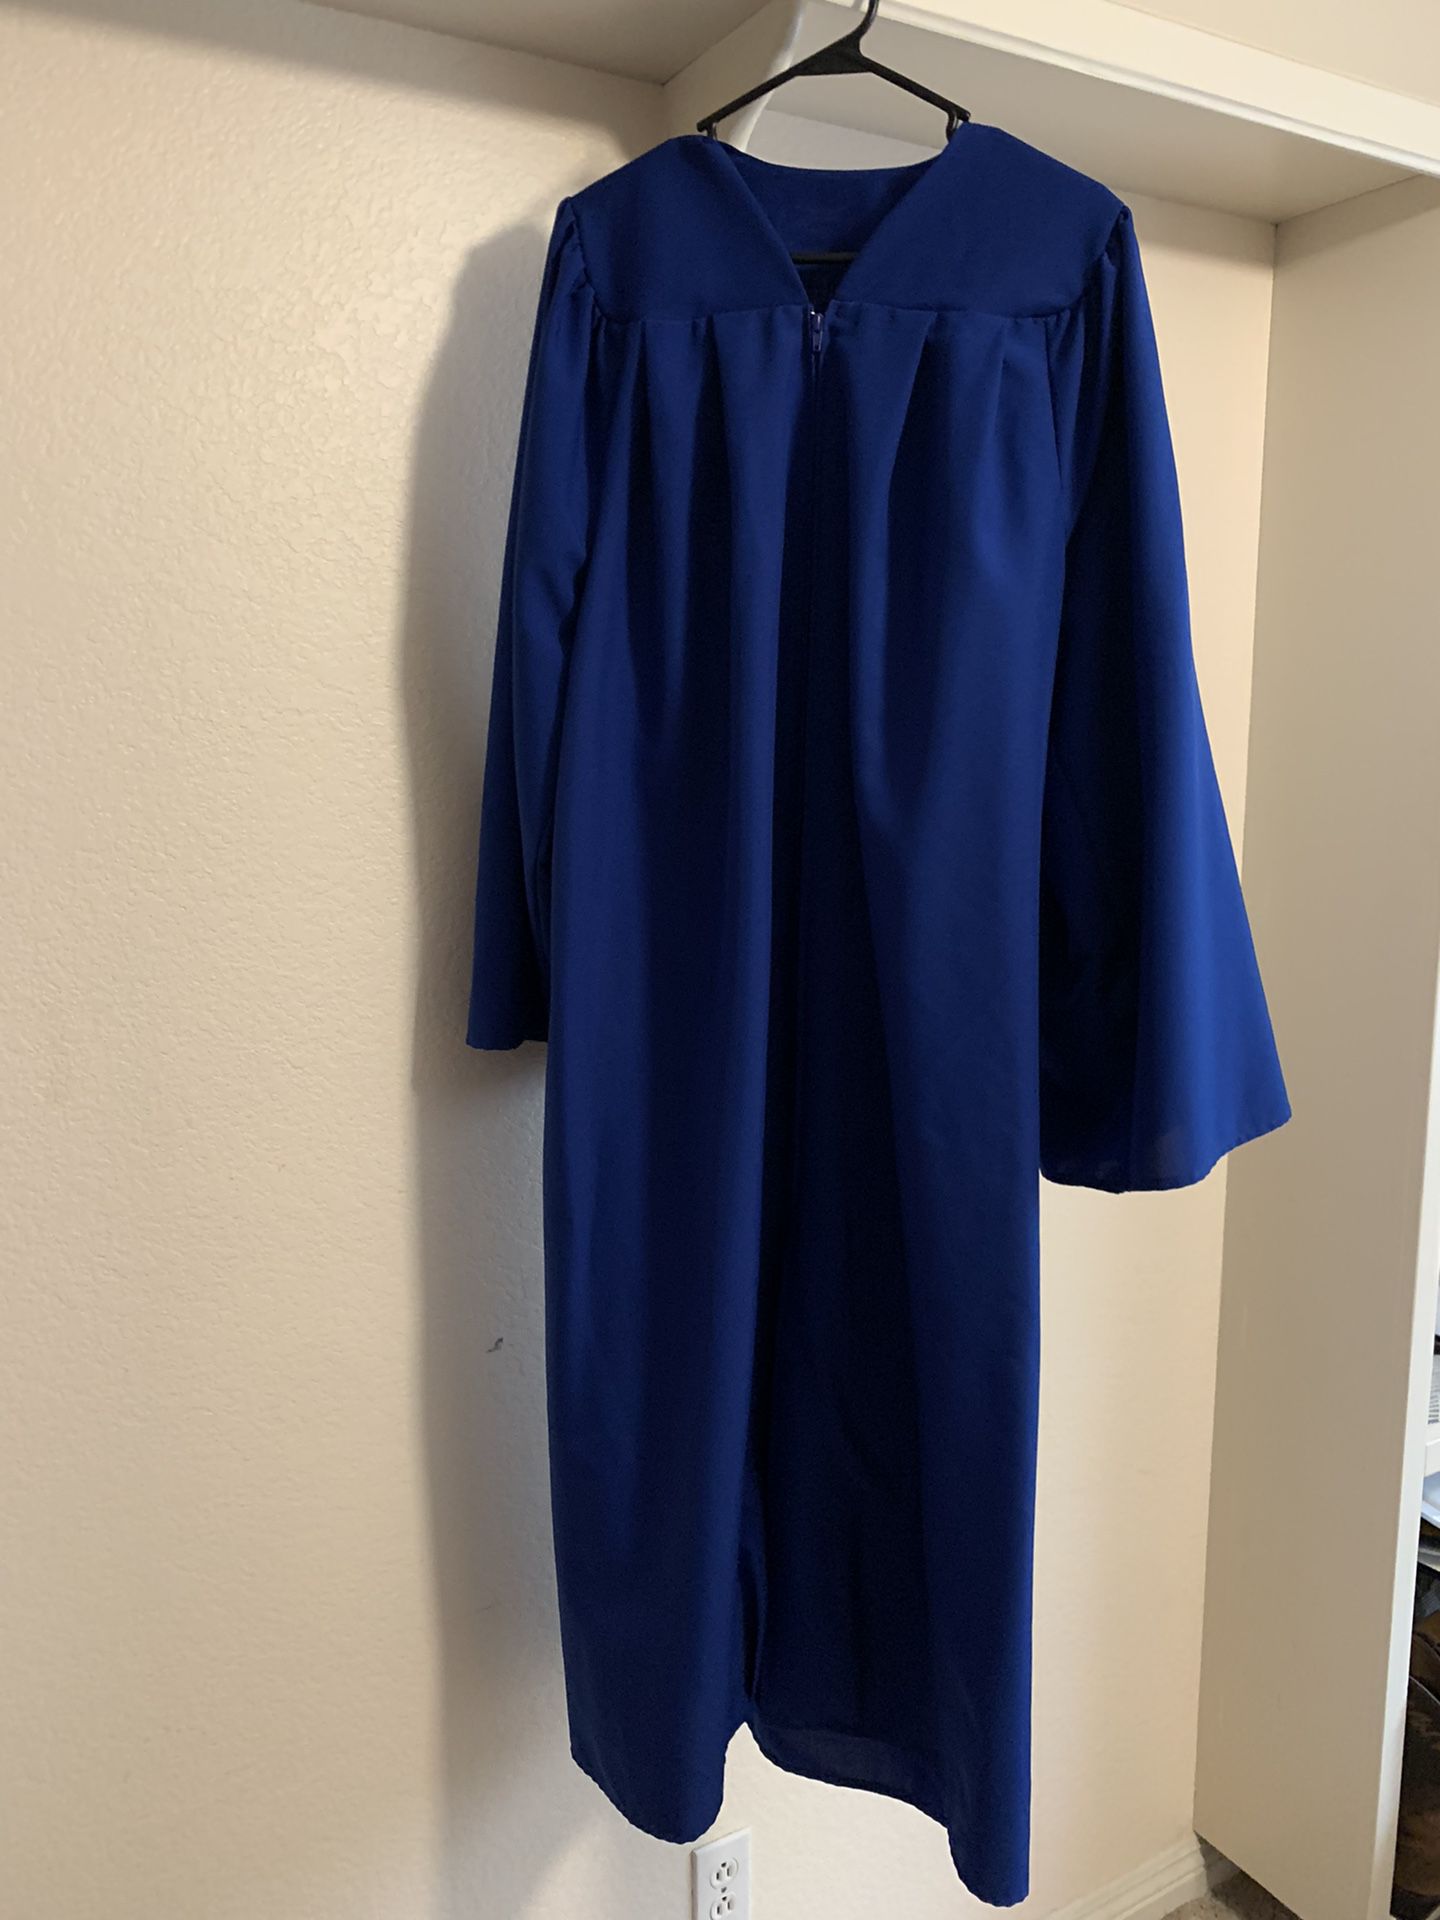 PERFECT FOR YOUR GRADUATE:  Royal Blue Graduation Gown With Cap